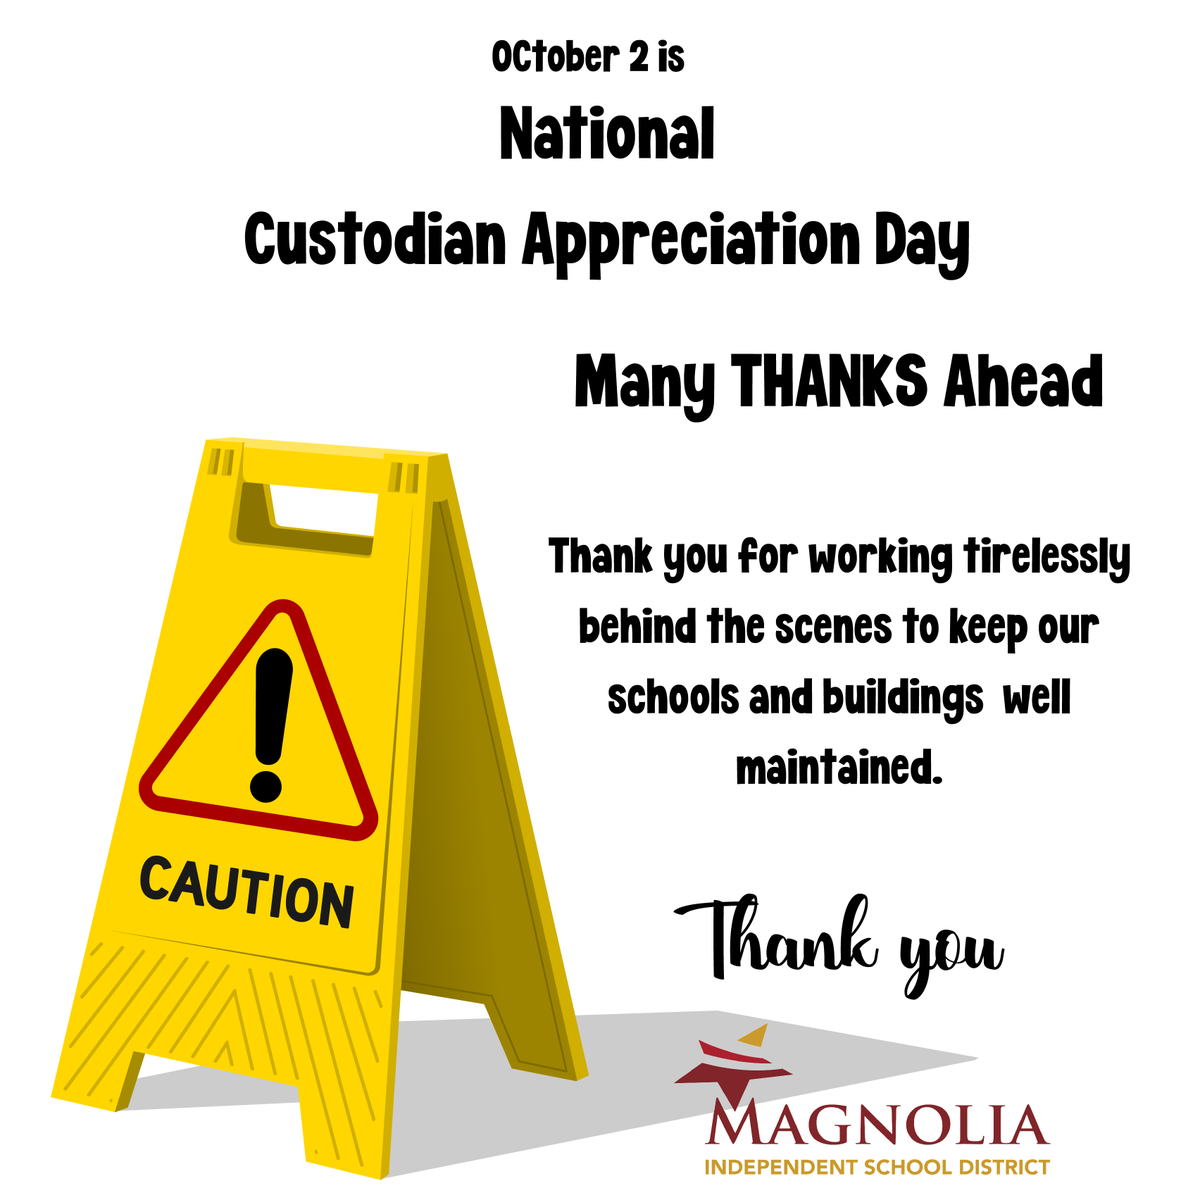 Today is Custodian Appreciation Day! 🎉 Thank you to all of our custodians for all the work they do to keep our school clean, safe and running smoothly. We appreciate you!